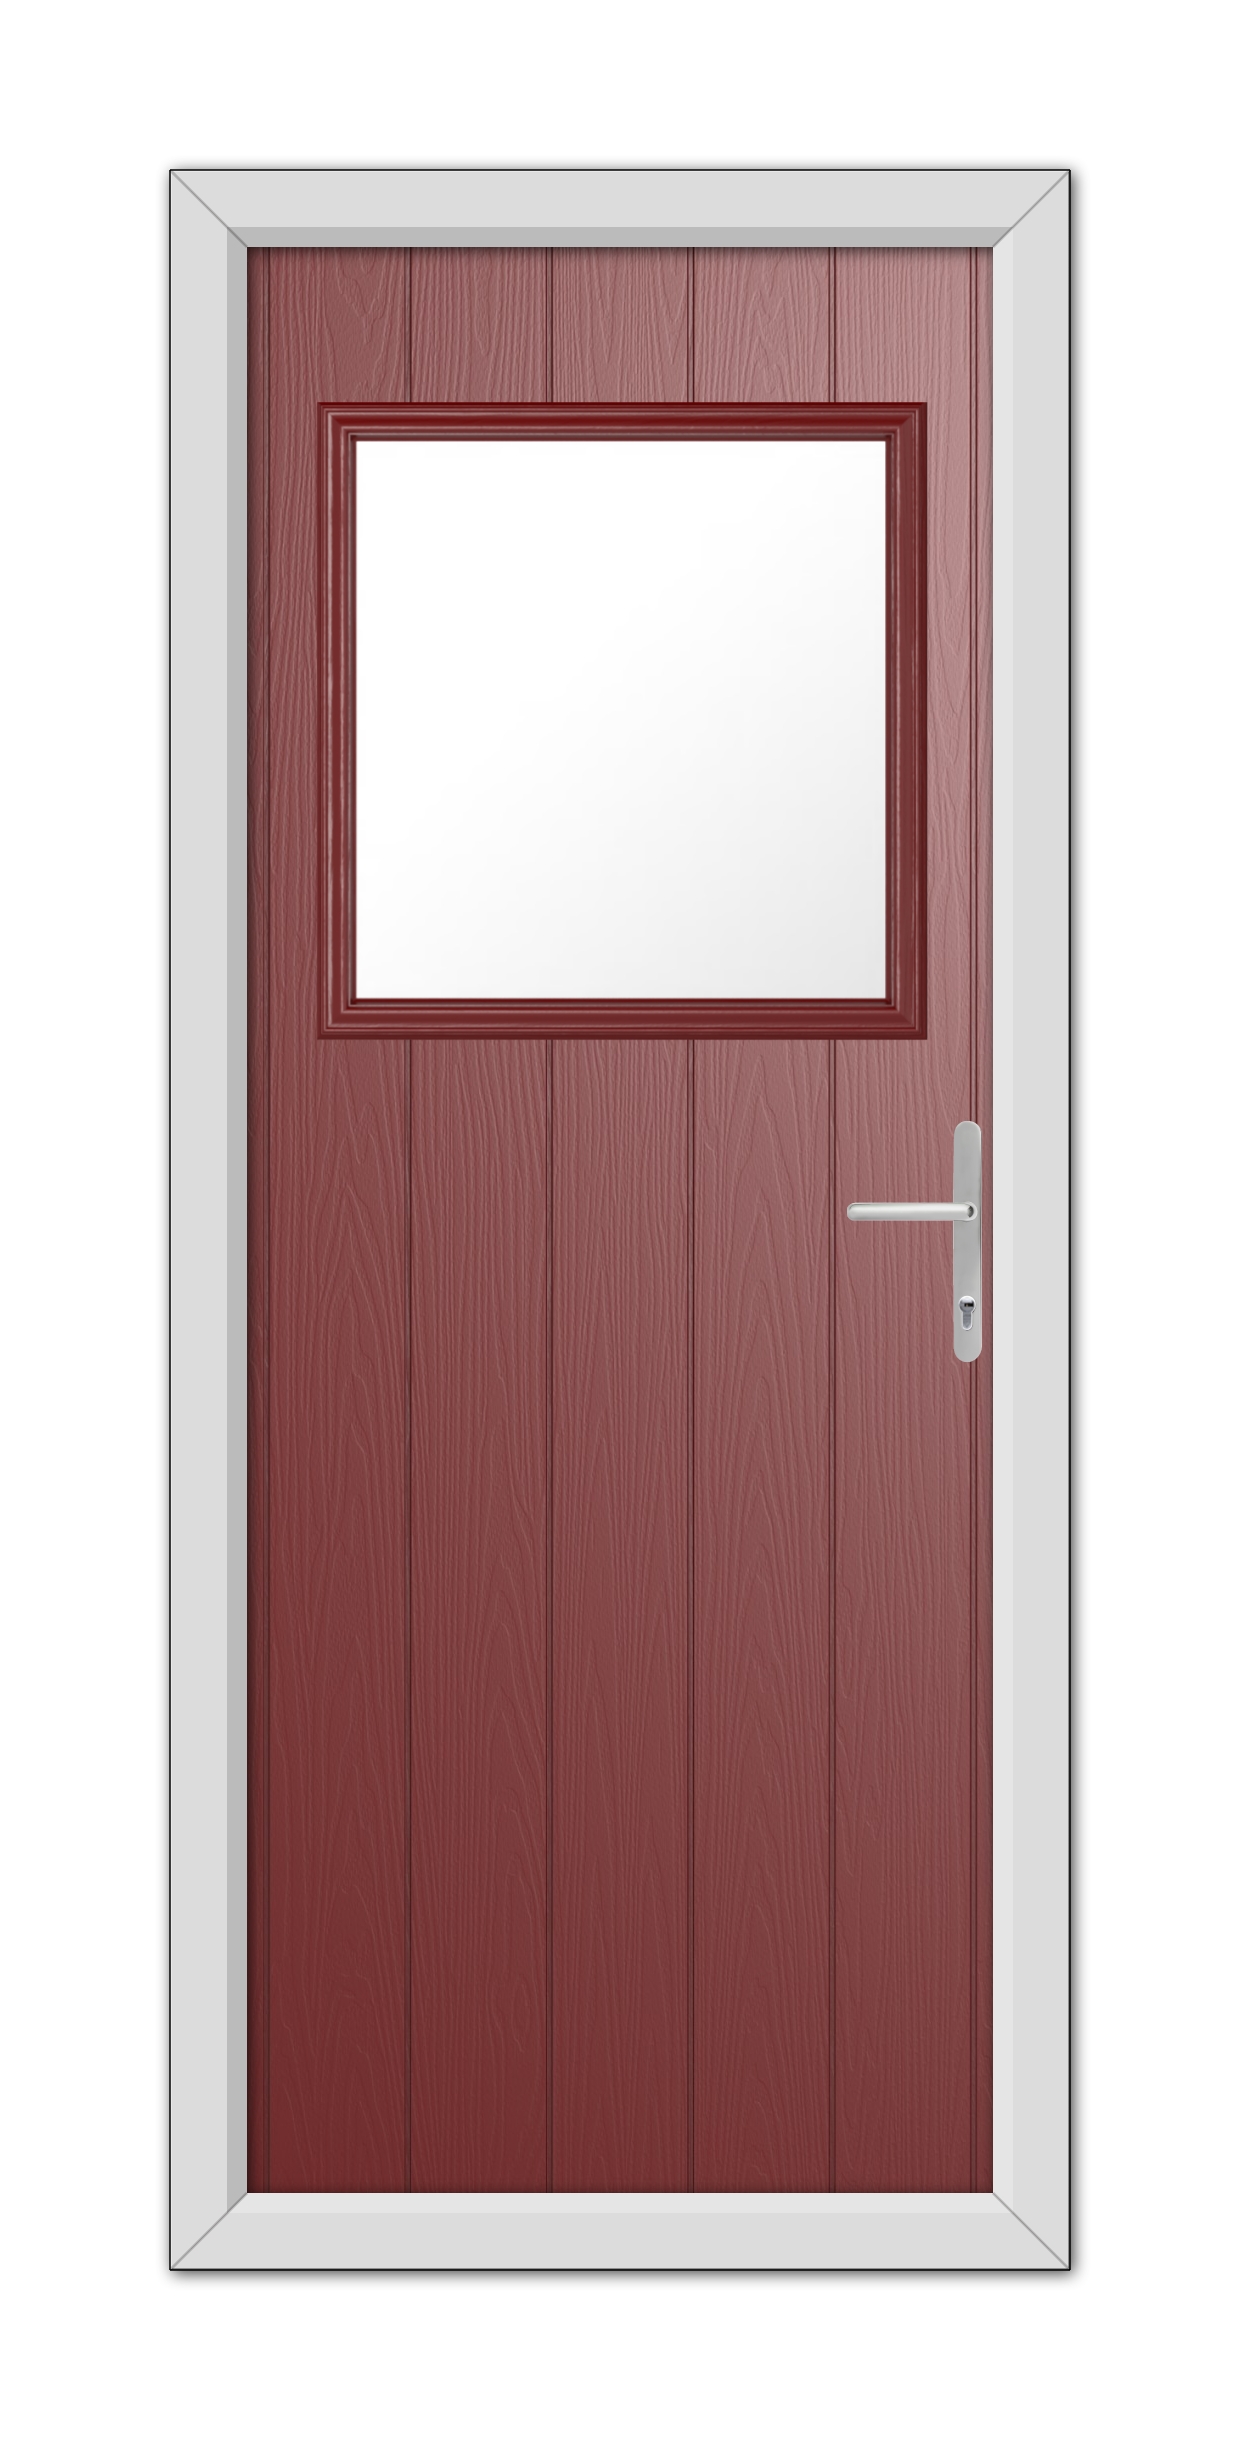 A modern Red Fife Composite Door 48mm Timber Core with a small rectangular window and a white metal handle, framed in white.